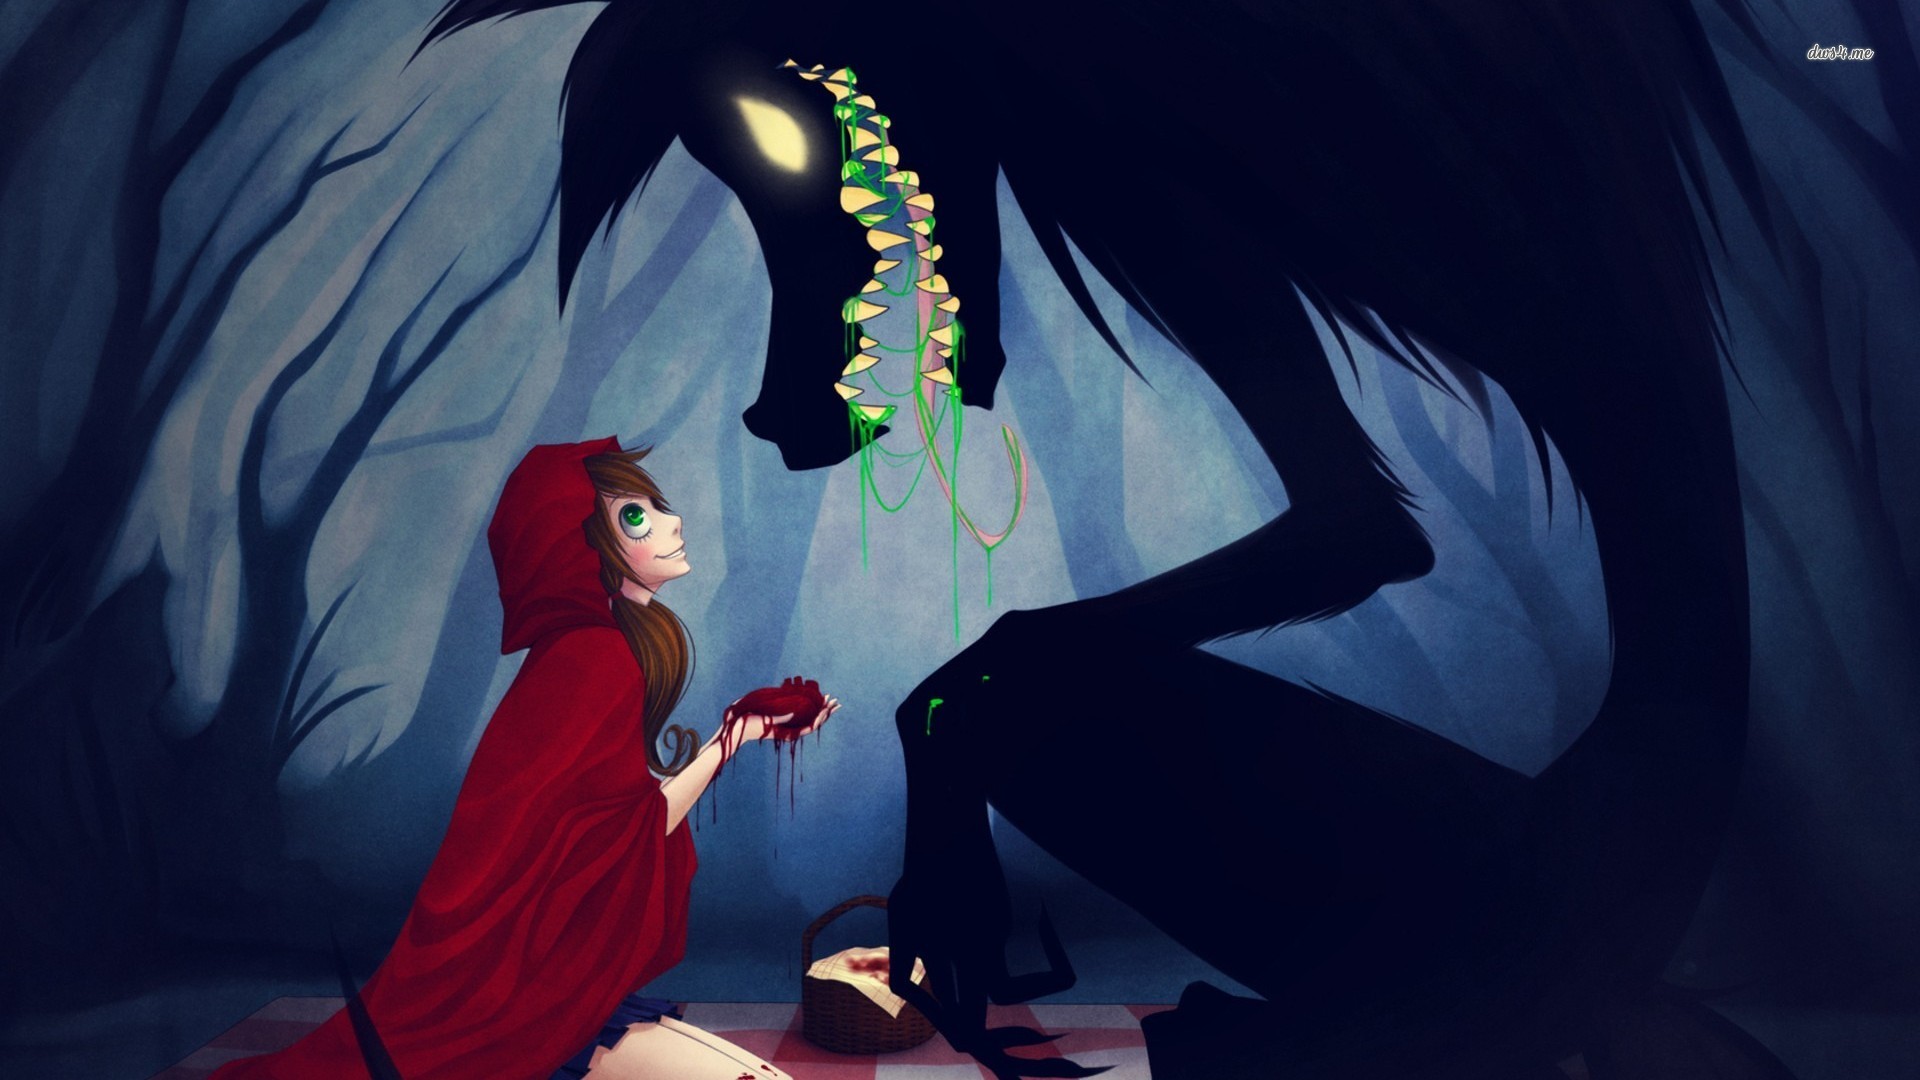 1920x1080 Creepy Red Riding Hood and the wolf wallpaper